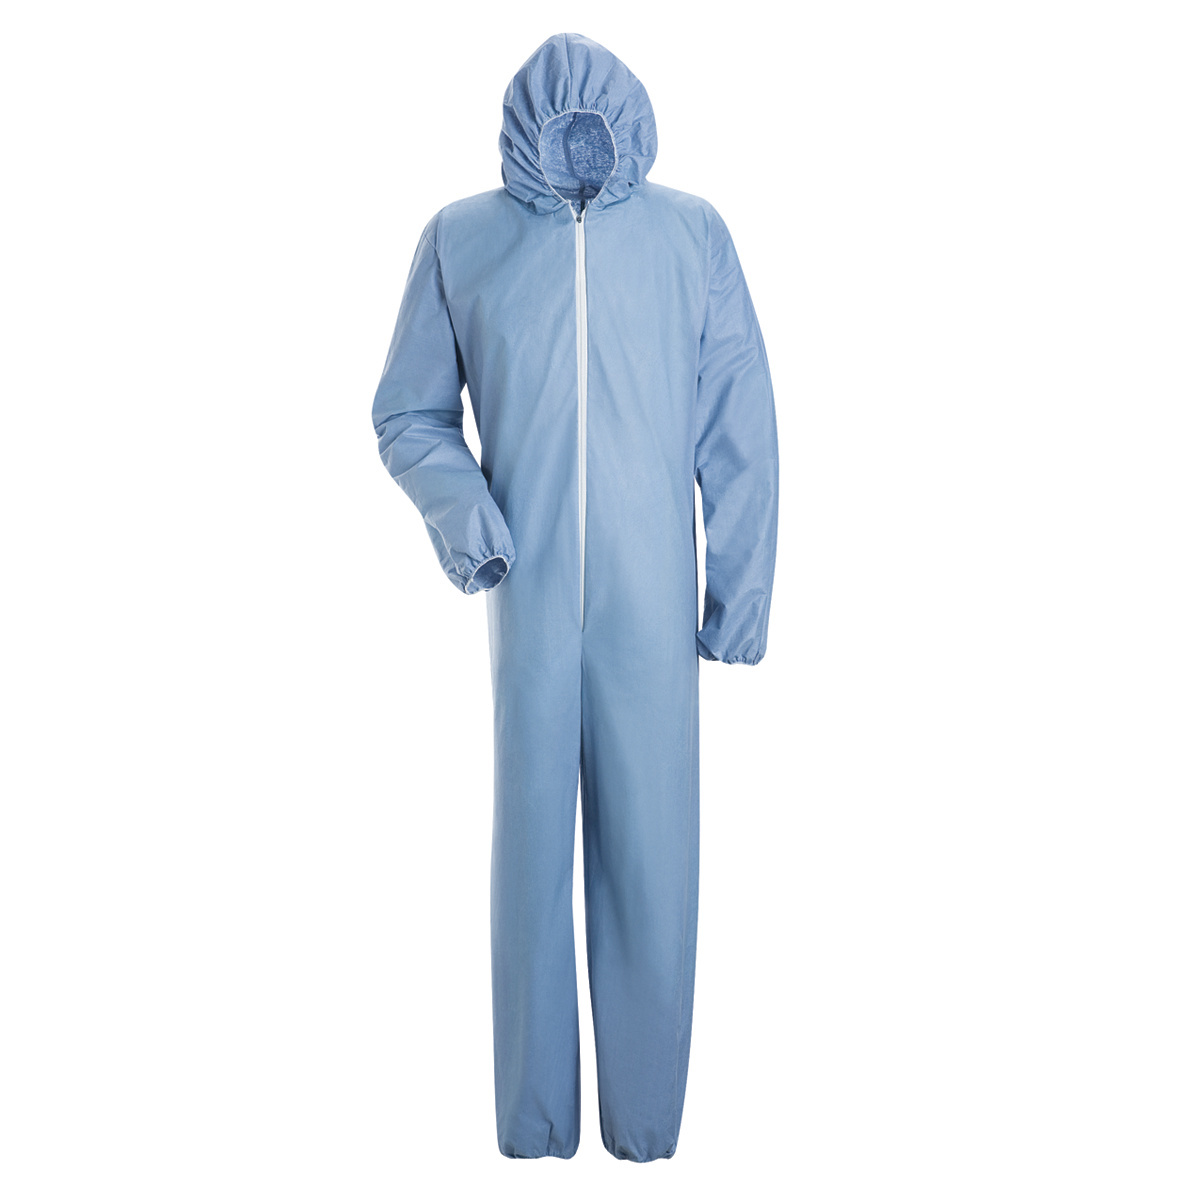 Bulwark® Medium Sky Blue PVC Coated Flame Resistant Disposable FR Coverall With Zipper Closure (Availability restrictions apply.